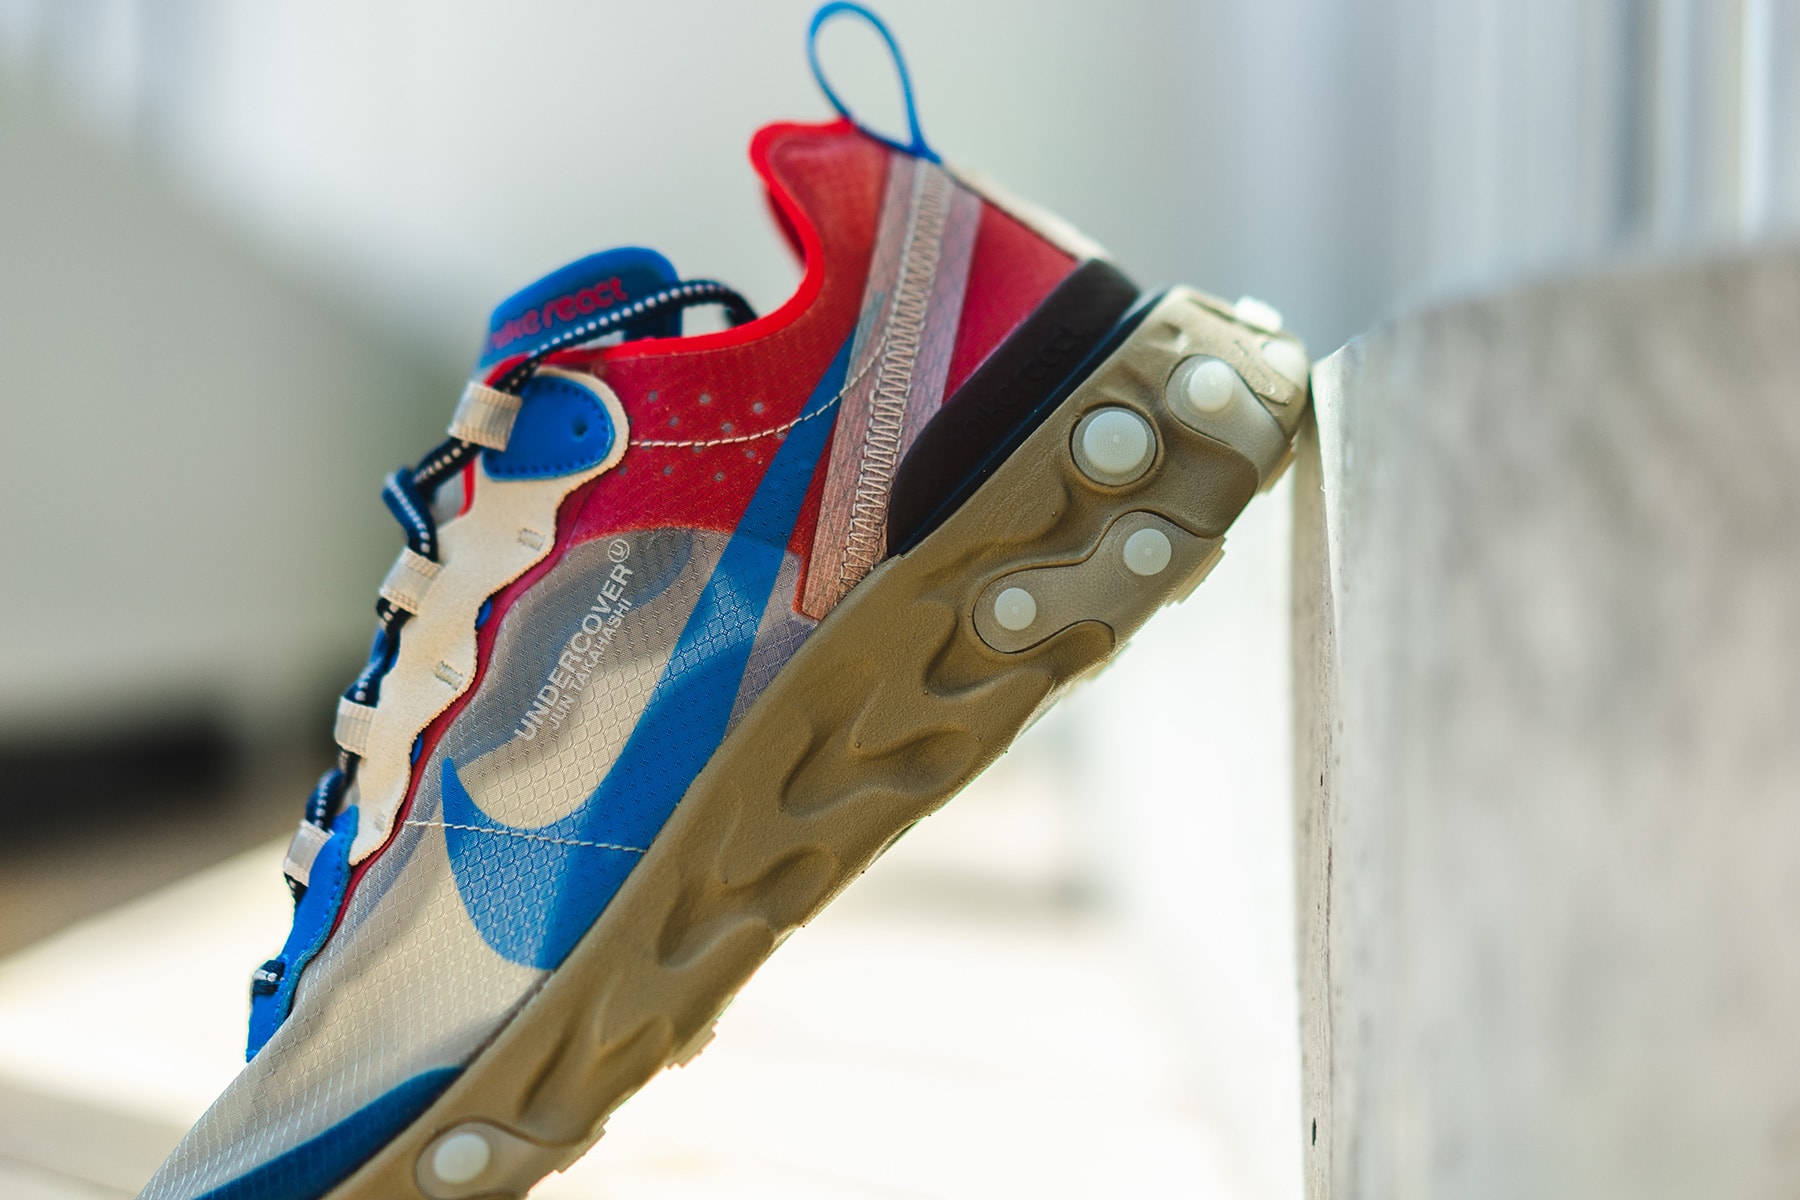 UNDERCOVER Reveals Nike React Element 87 Collaboration